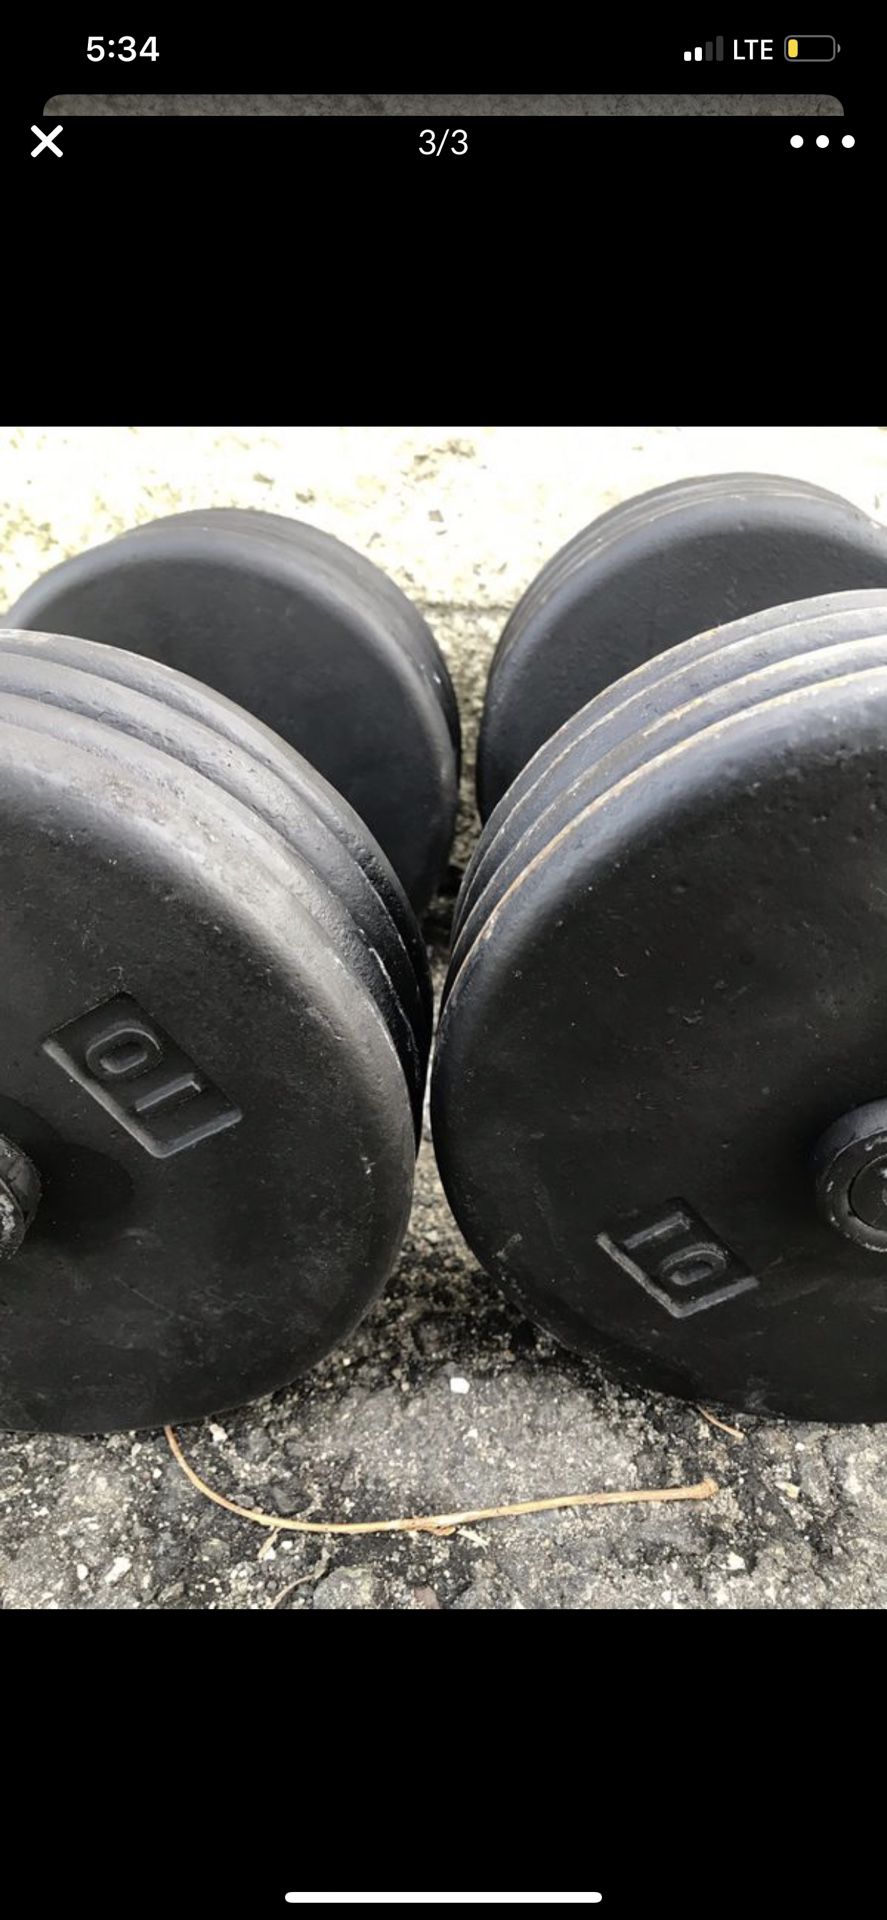 Pair of 80 lbs pounds dumbbells